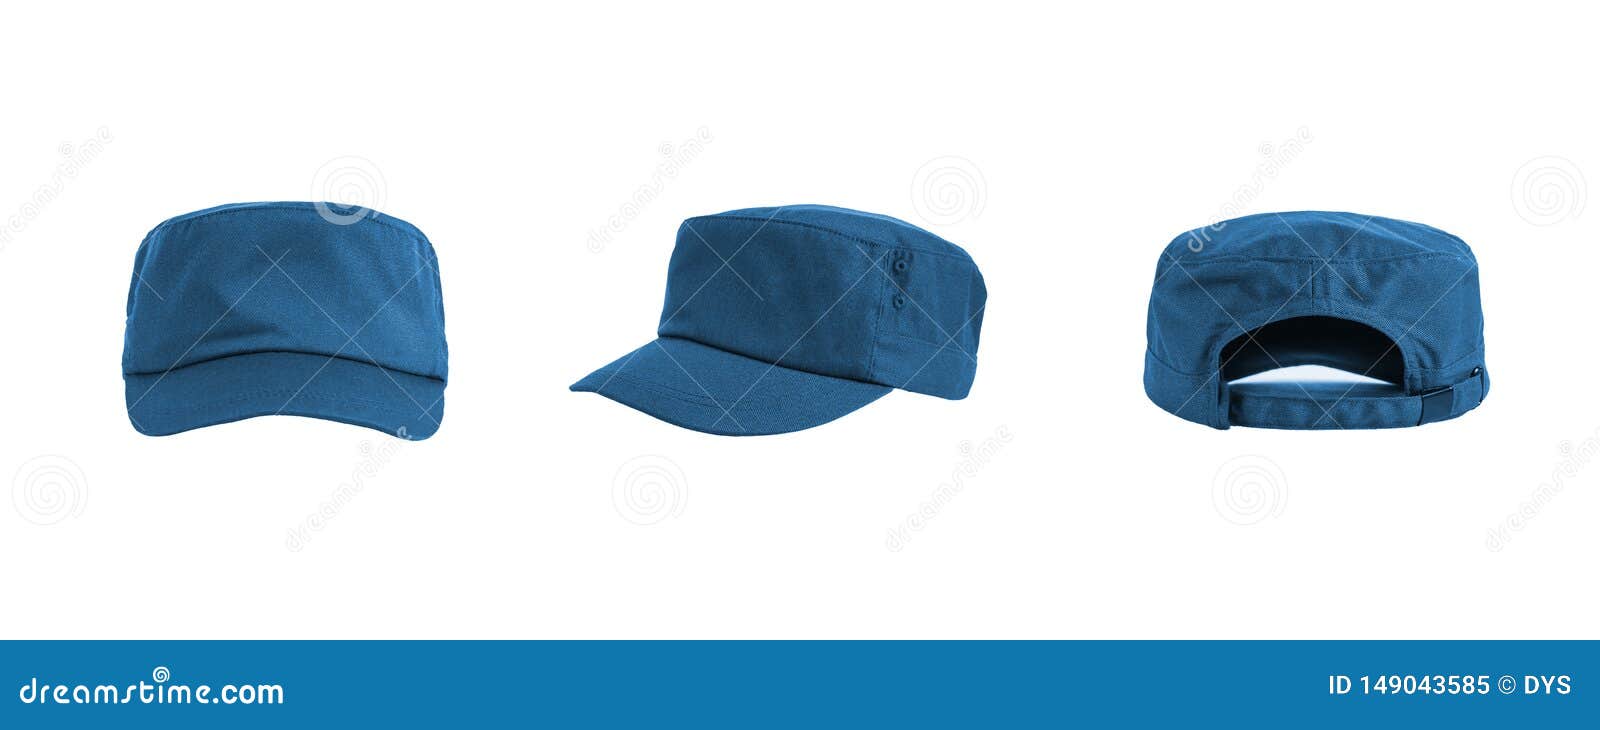 Download Blank Plain Combat Caps Blue Color Isolated On White ...